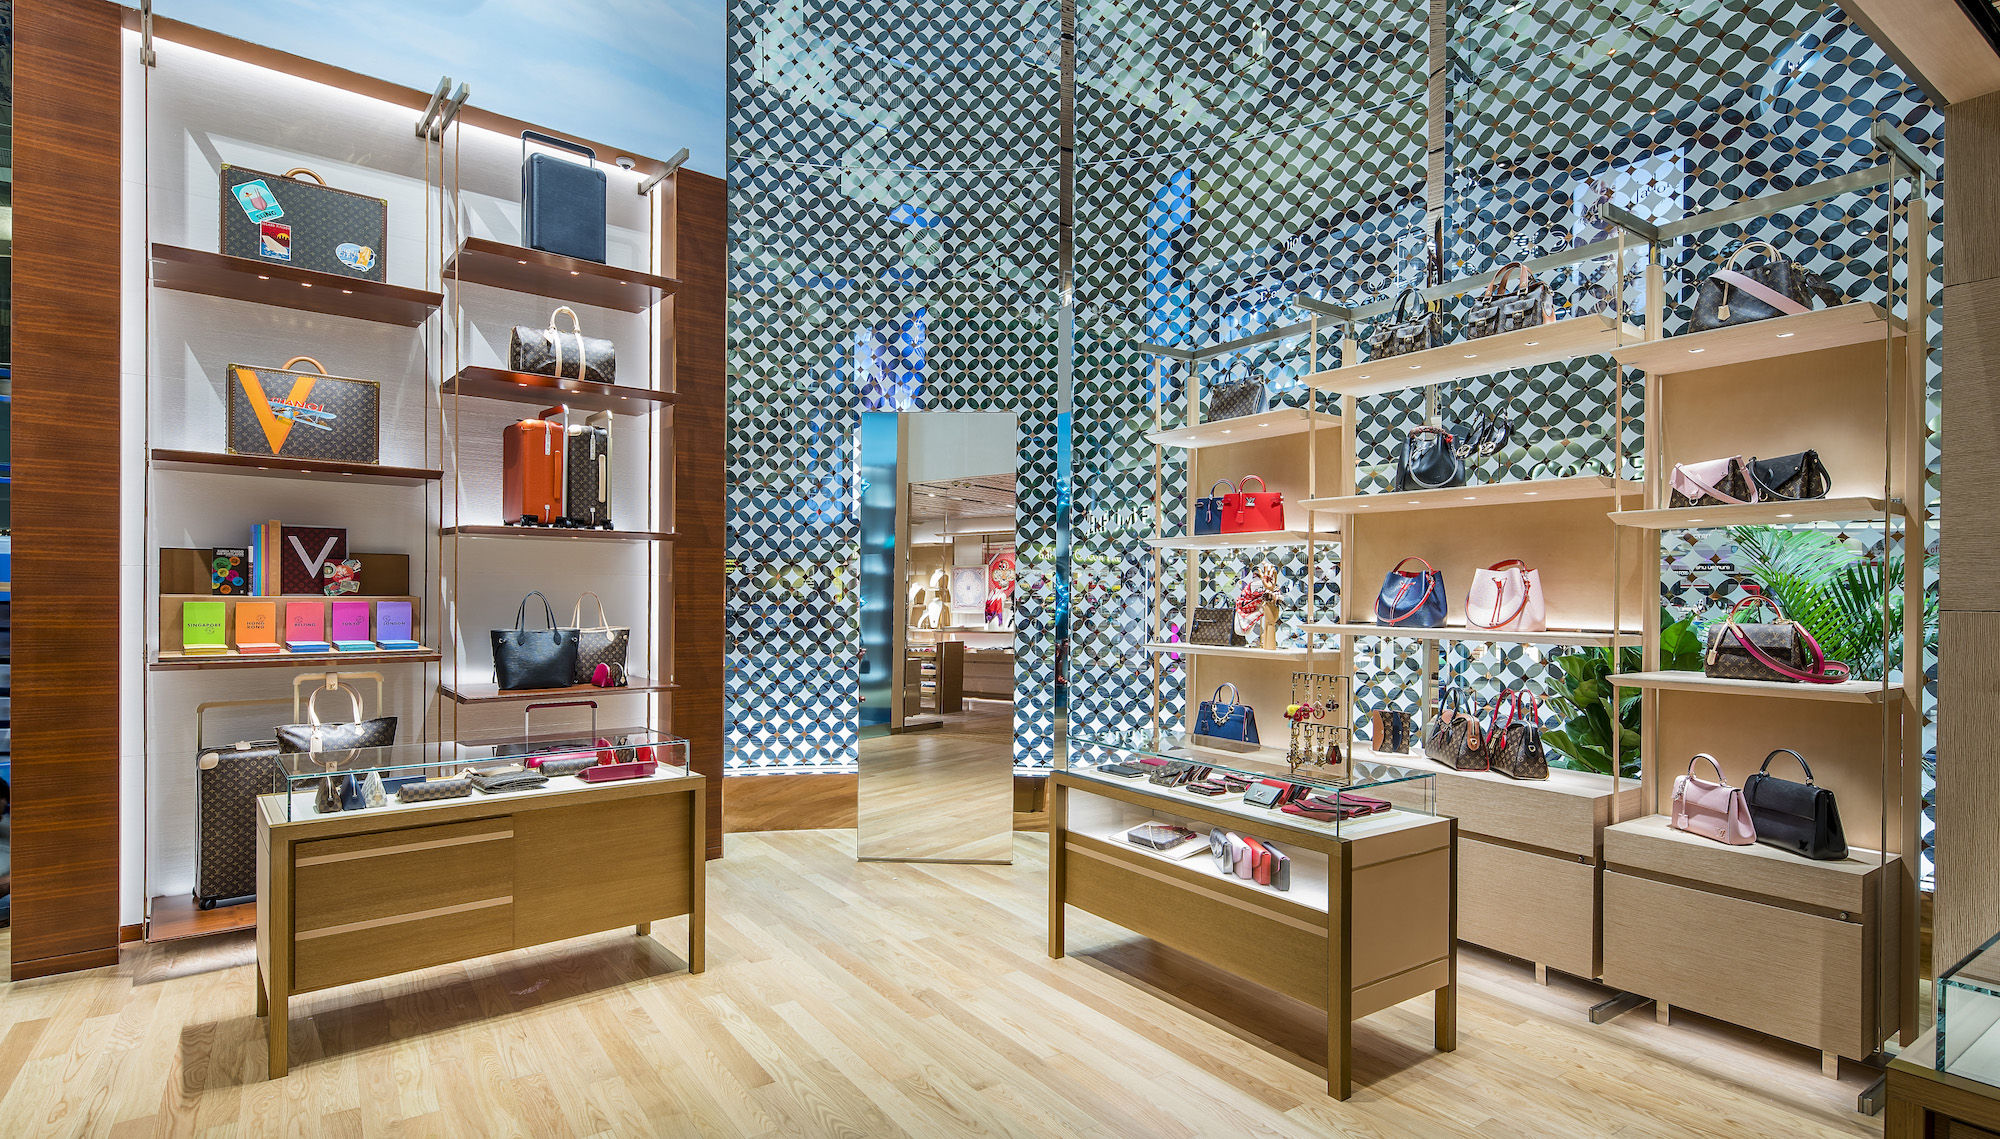 Louis Vuitton duplex opens in Changi airport T3 transit hall